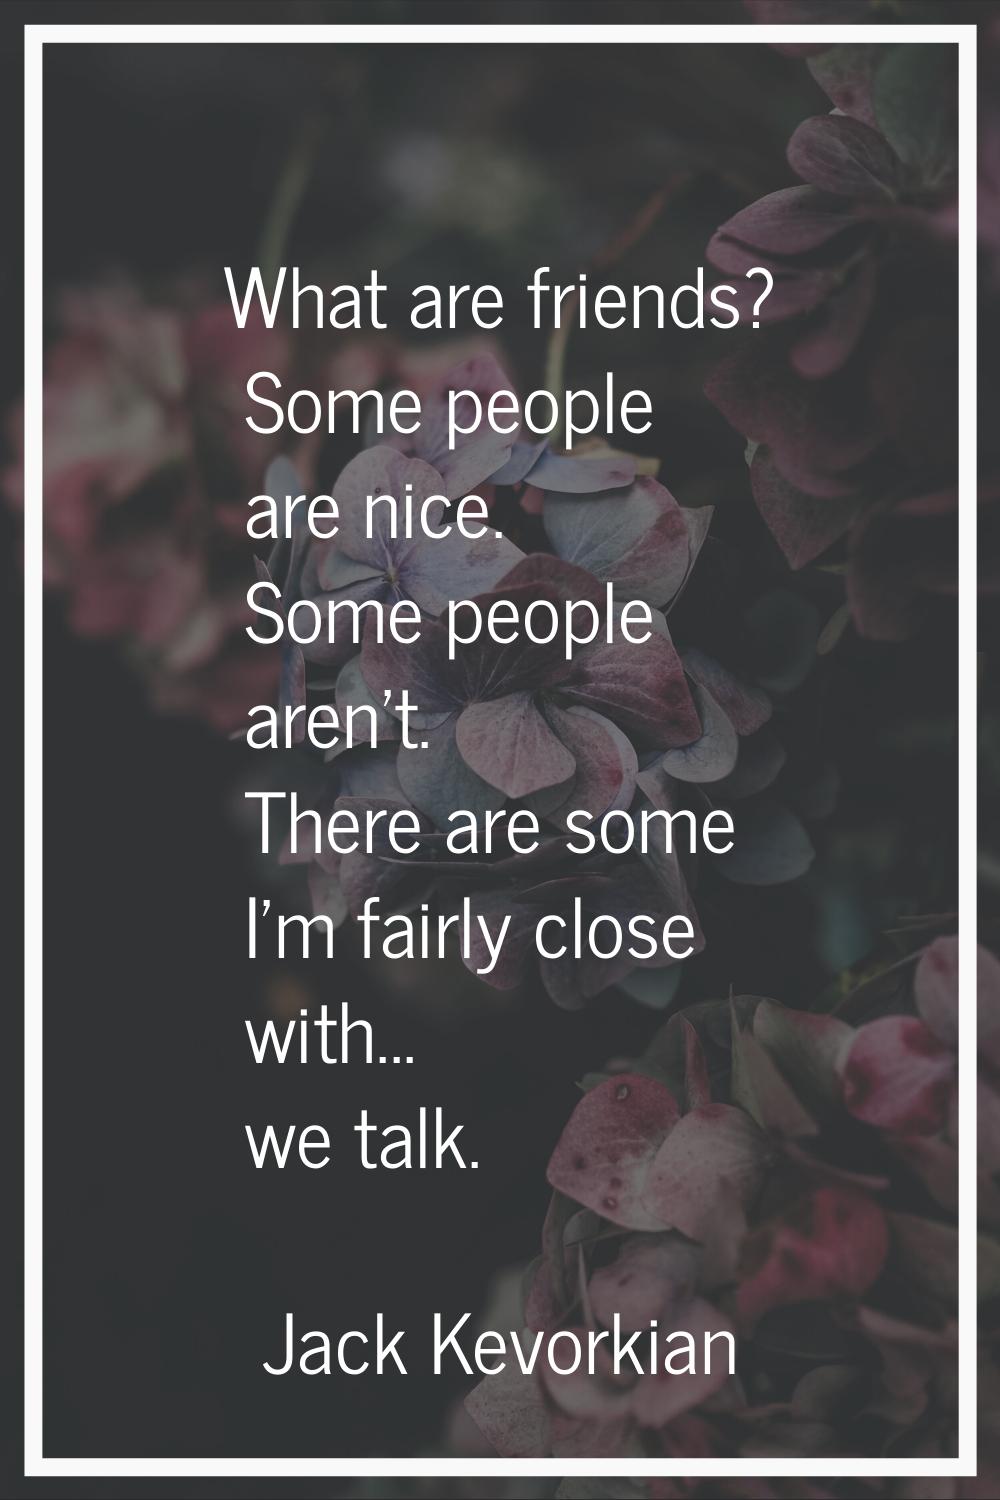 What are friends? Some people are nice. Some people aren't. There are some I'm fairly close with...